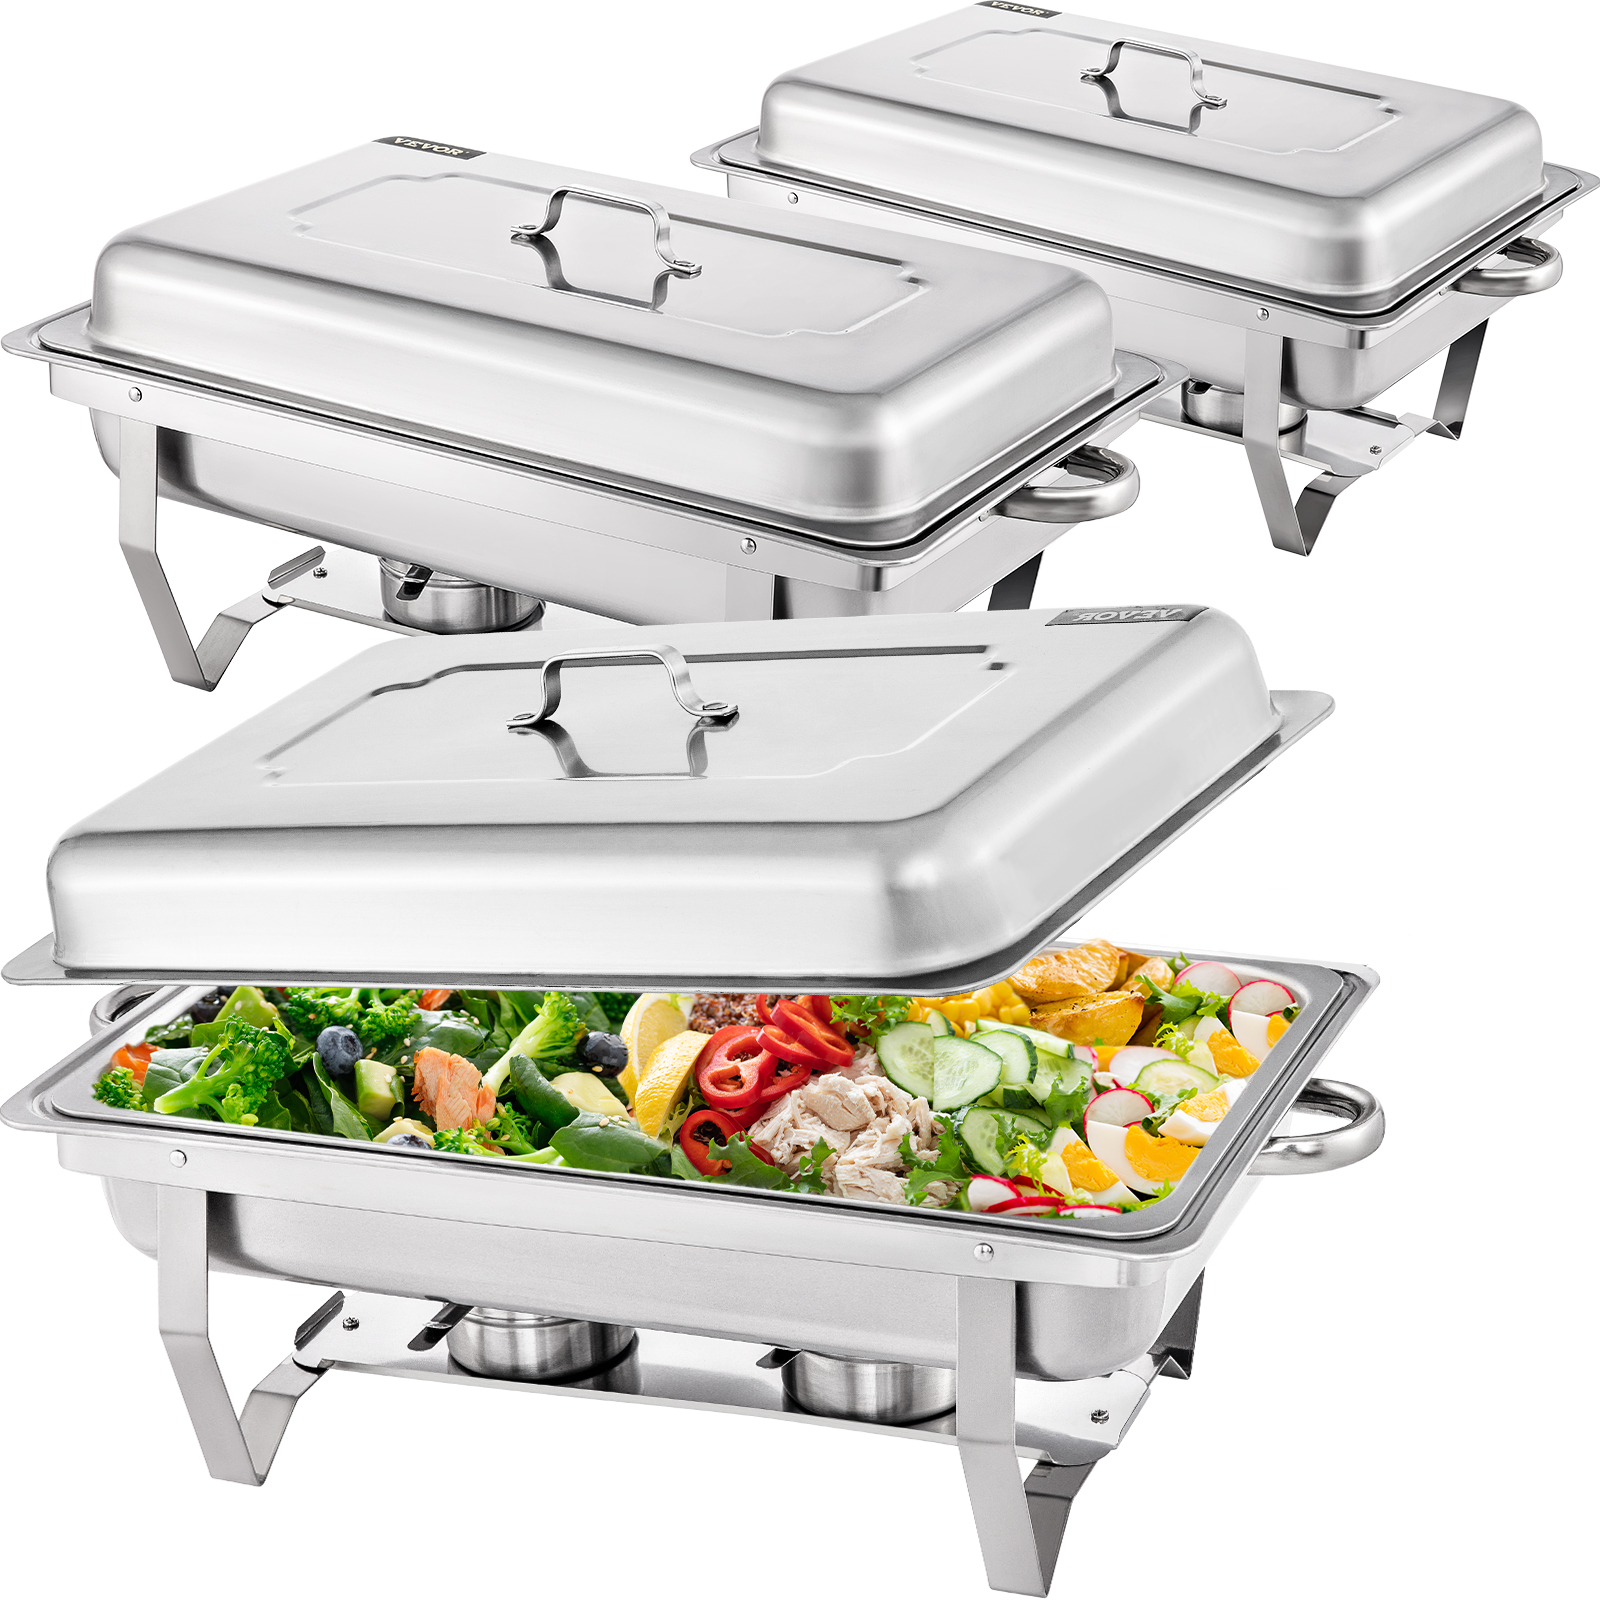 3pack Chafer Chafing Dish + 1/2 Inserts Warm Tray Set 8 Qt Party Pack Catering от Vevor Many GEOs